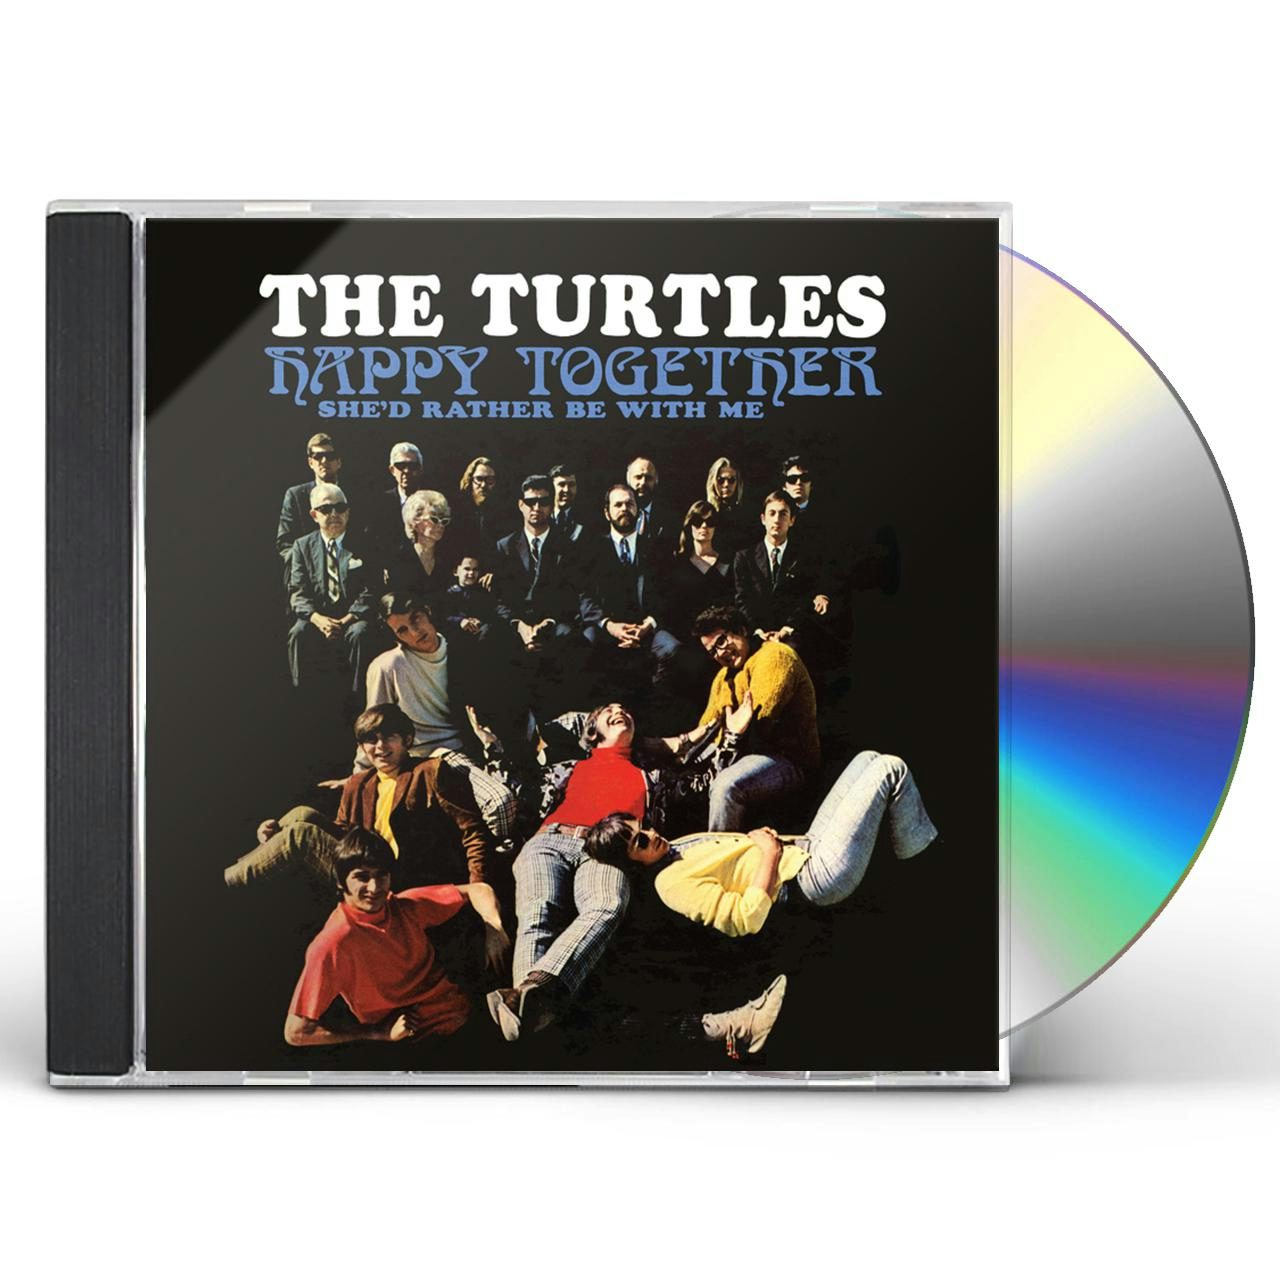 The Turtles HAPPY TOGETHER CD